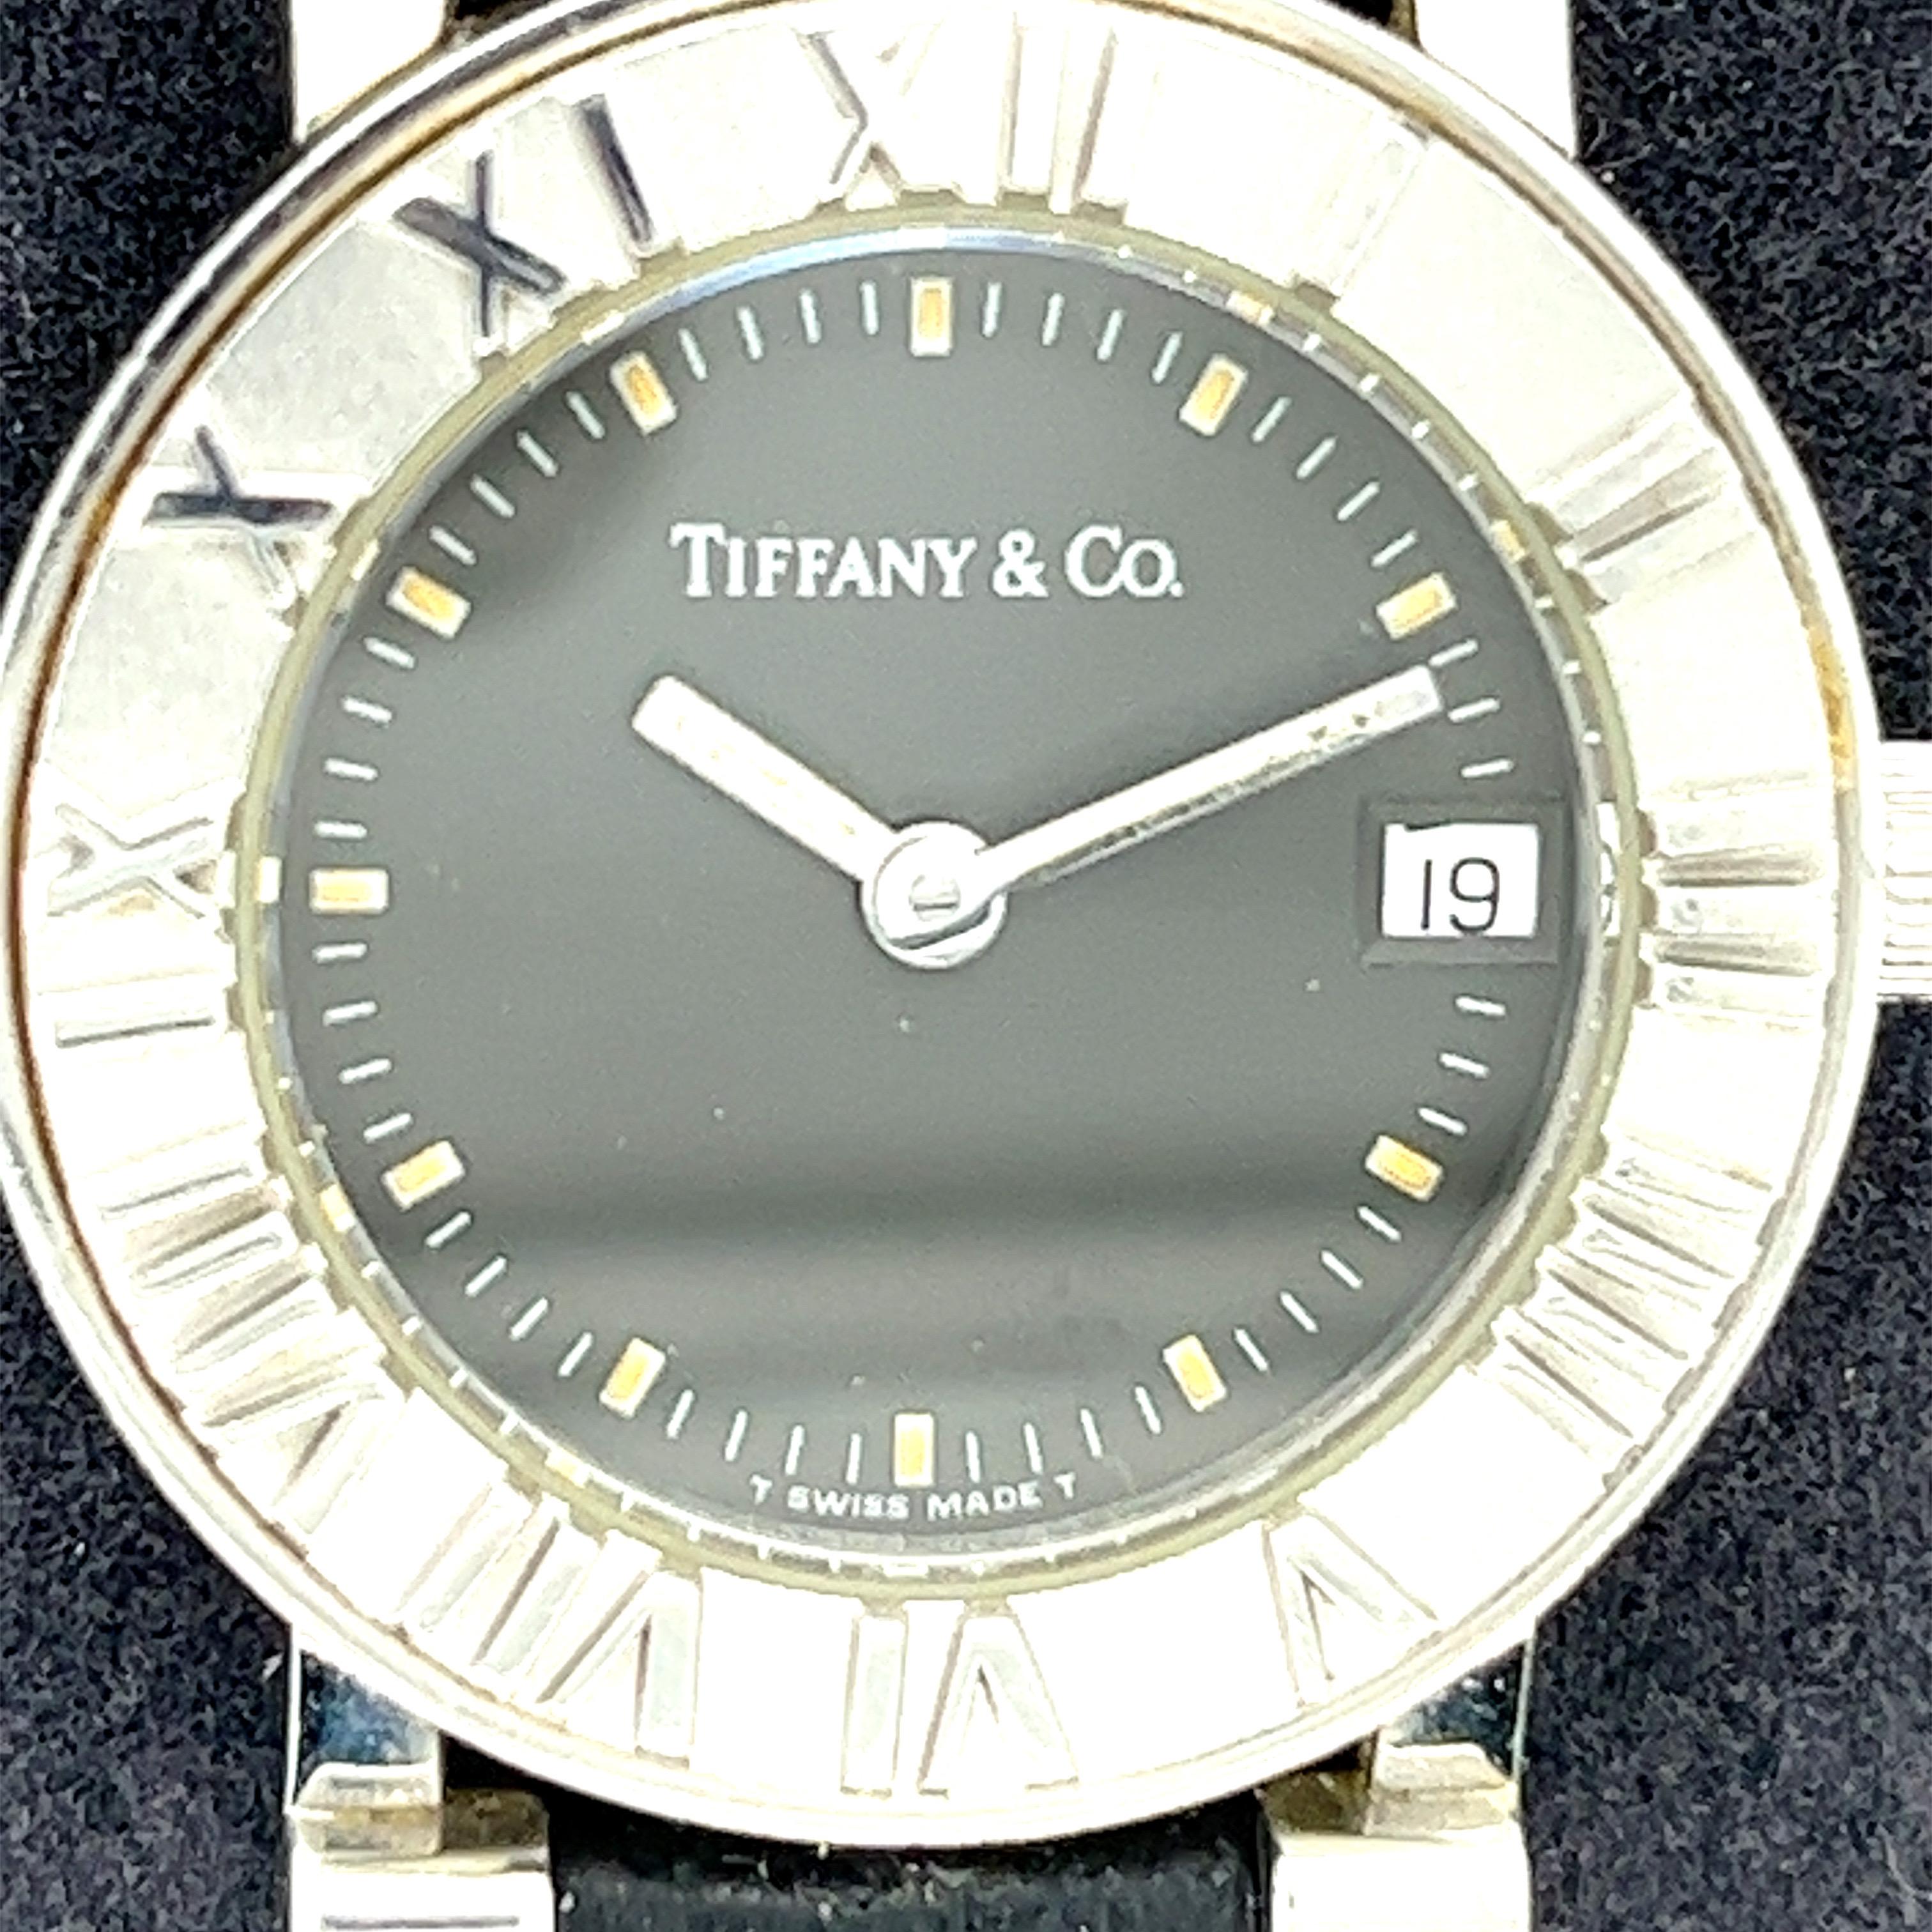 Tiffany & Co. Atlas Watch In Excellent Condition For Sale In Vaughan, CA